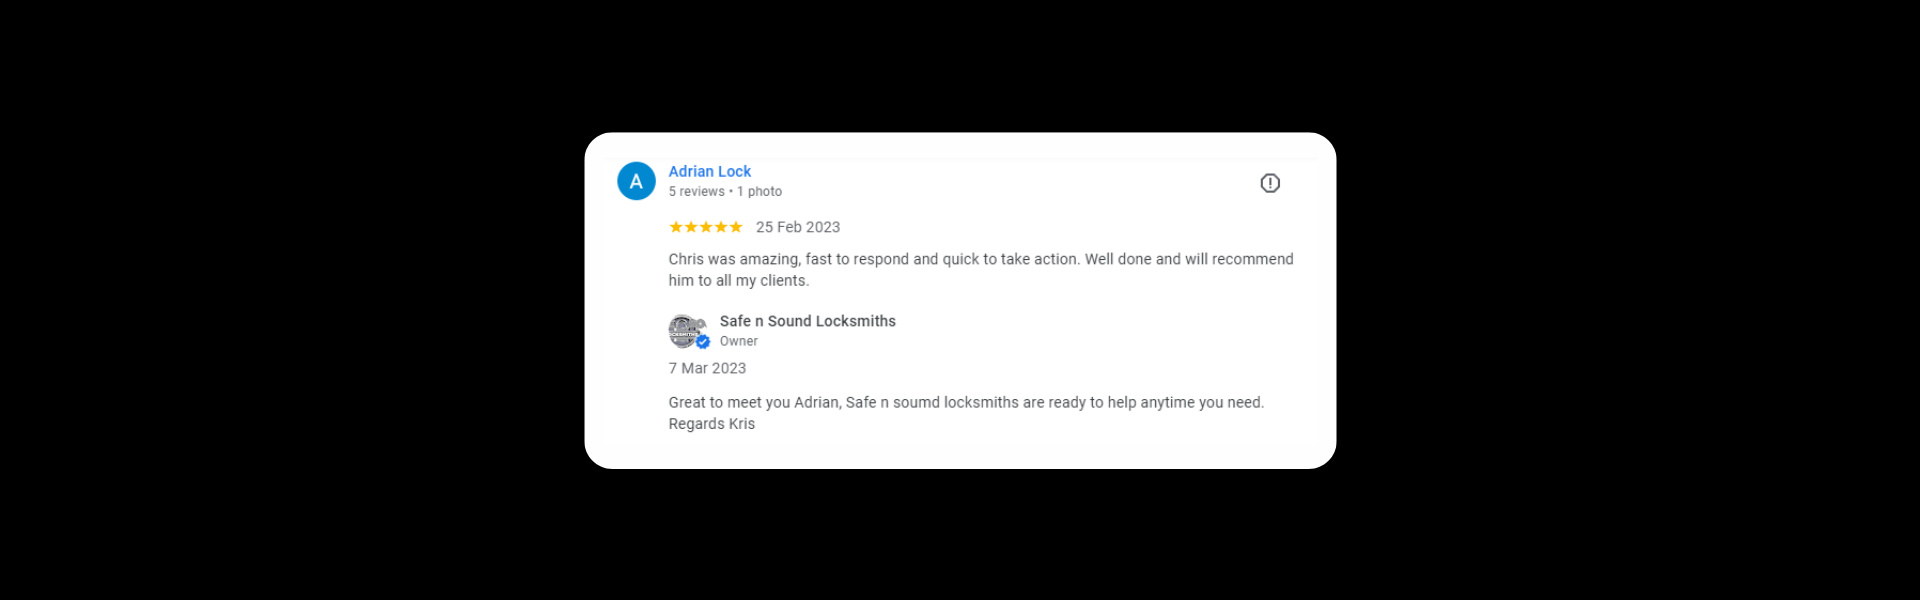 Adrian Lock 5 reviews·1 photo a year ago Chris was amazing, fast to respond and quick to take action. Well done and will recommend him to all my clients. Response from the owner a year ago Great to meet you Adrian, Safe n sound locksmiths are ready to help anytime you need. Regards Kris